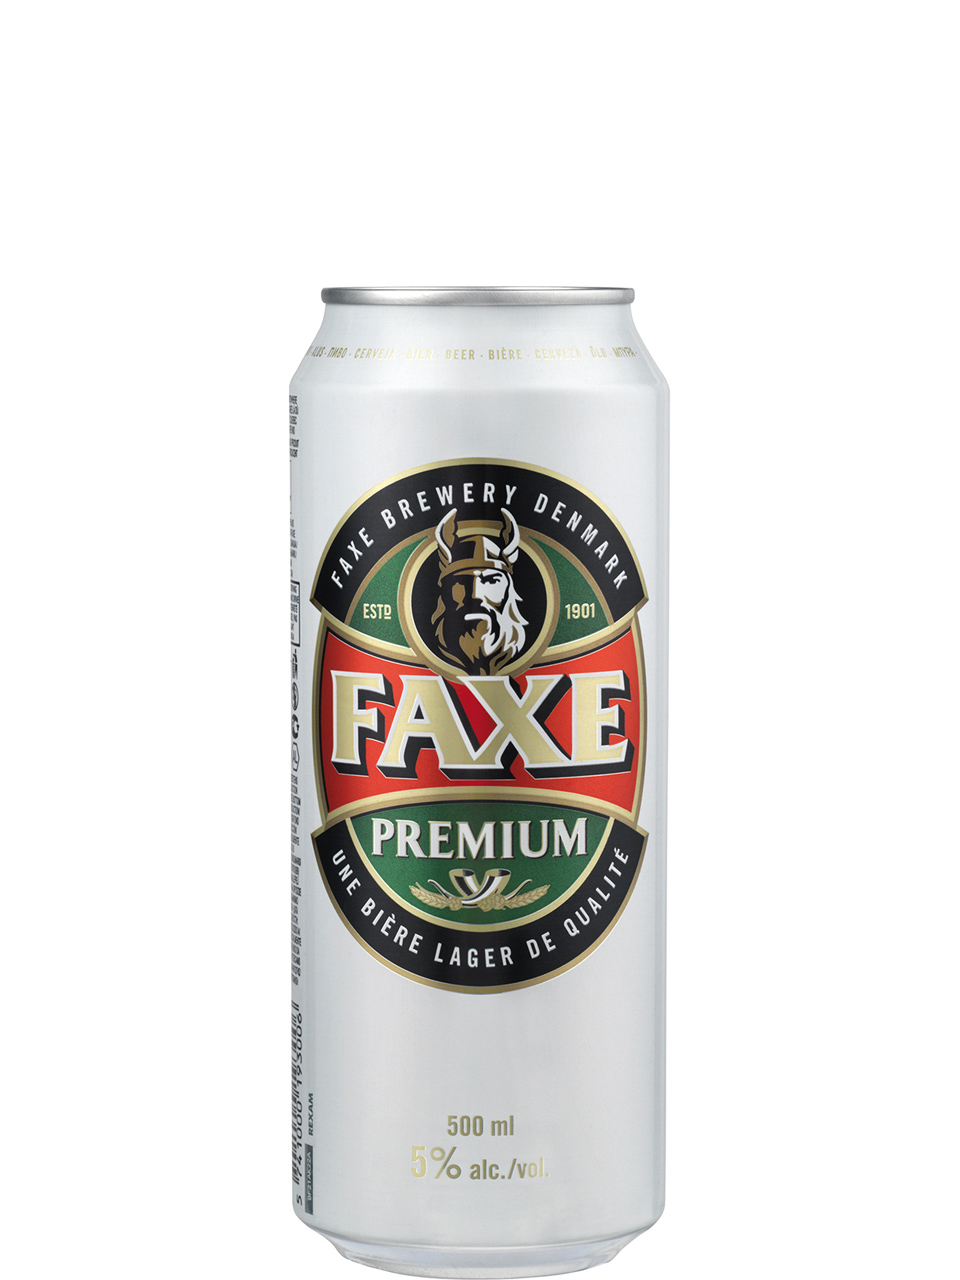 2020 Empty can Faxe Premium Beer NEWEST #4 450 ml Russia 